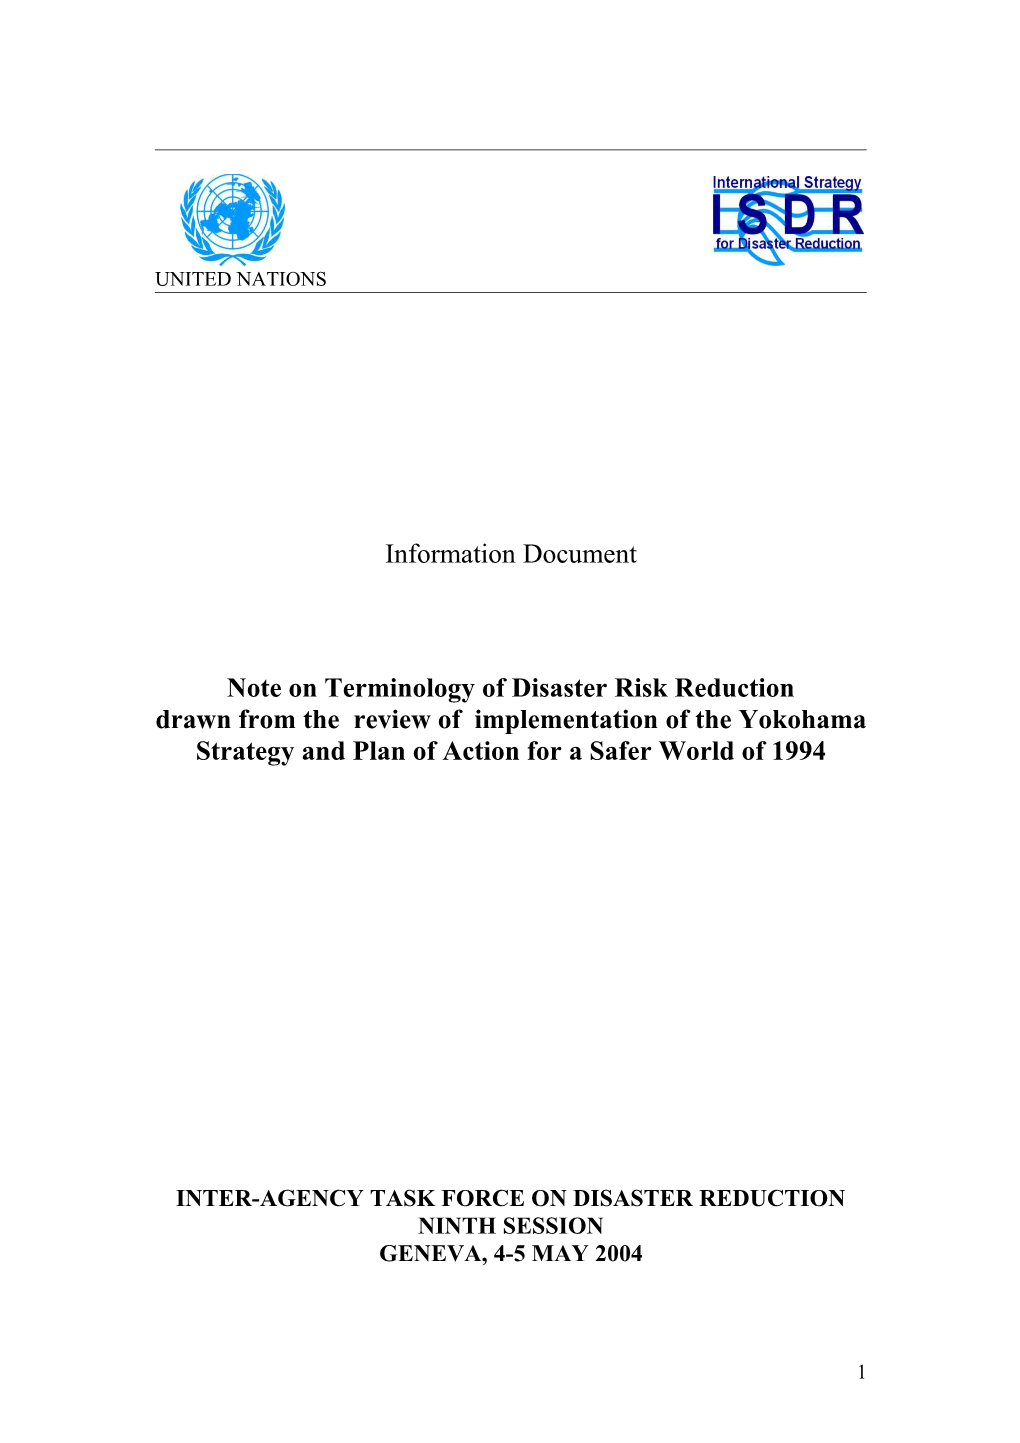 Note on Terminology of Disaster Risk Reduction